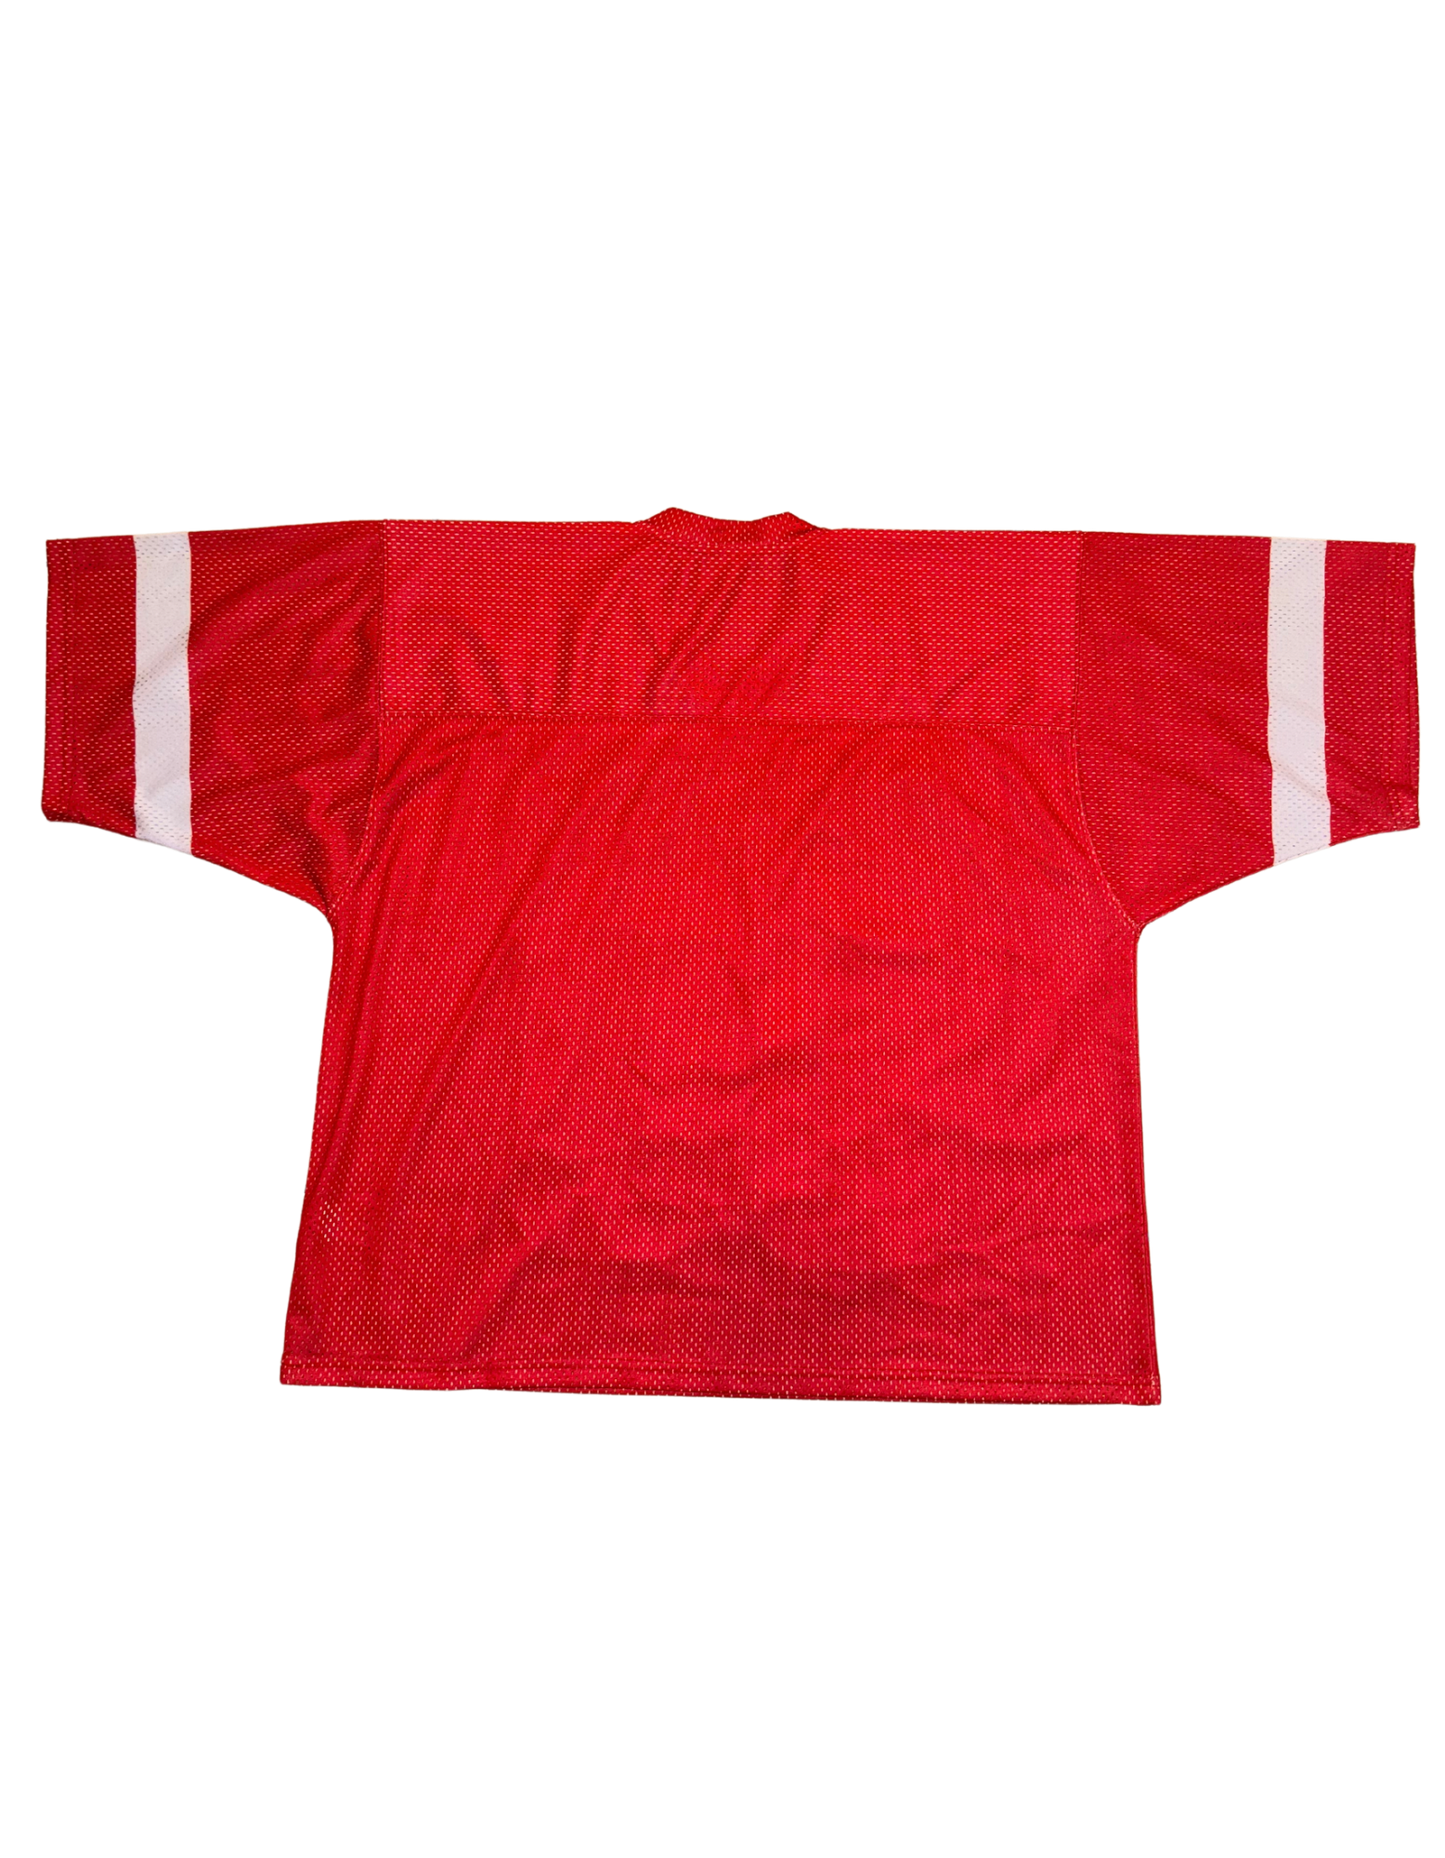 RED DISCIPLE JERSEY